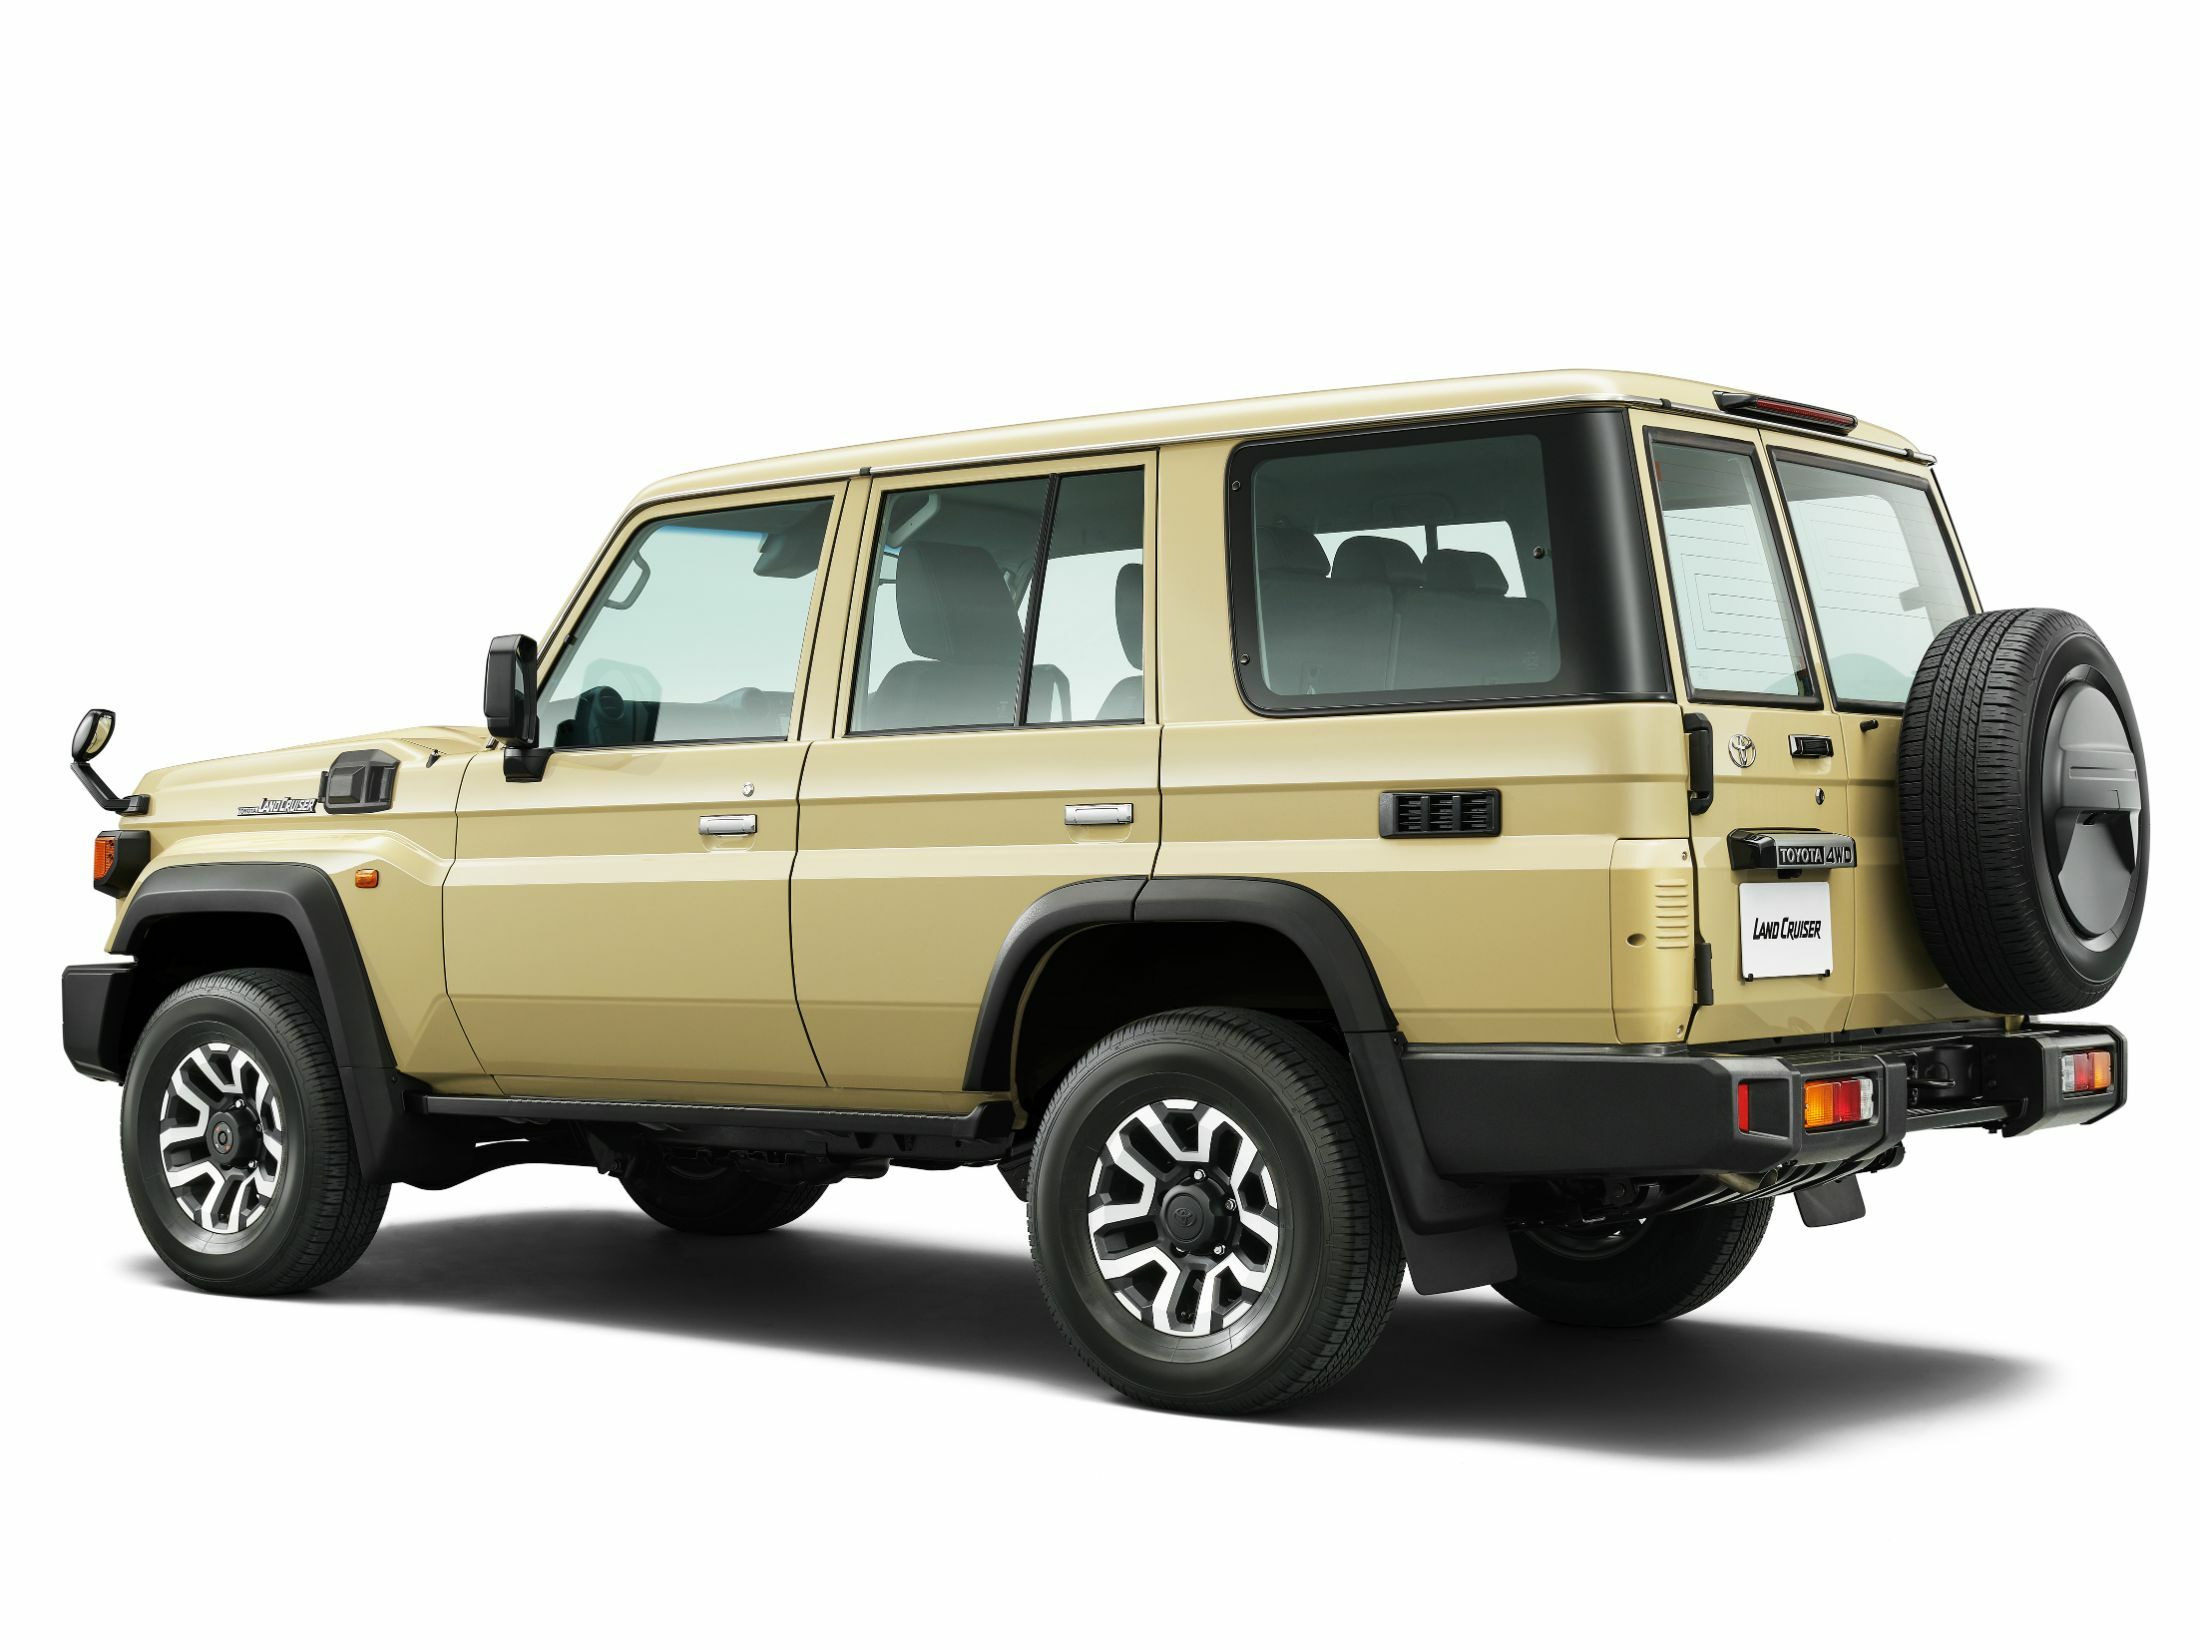 Nearly 40YearOld Toyota Land Cruiser 70 Series Gets Upgraded With